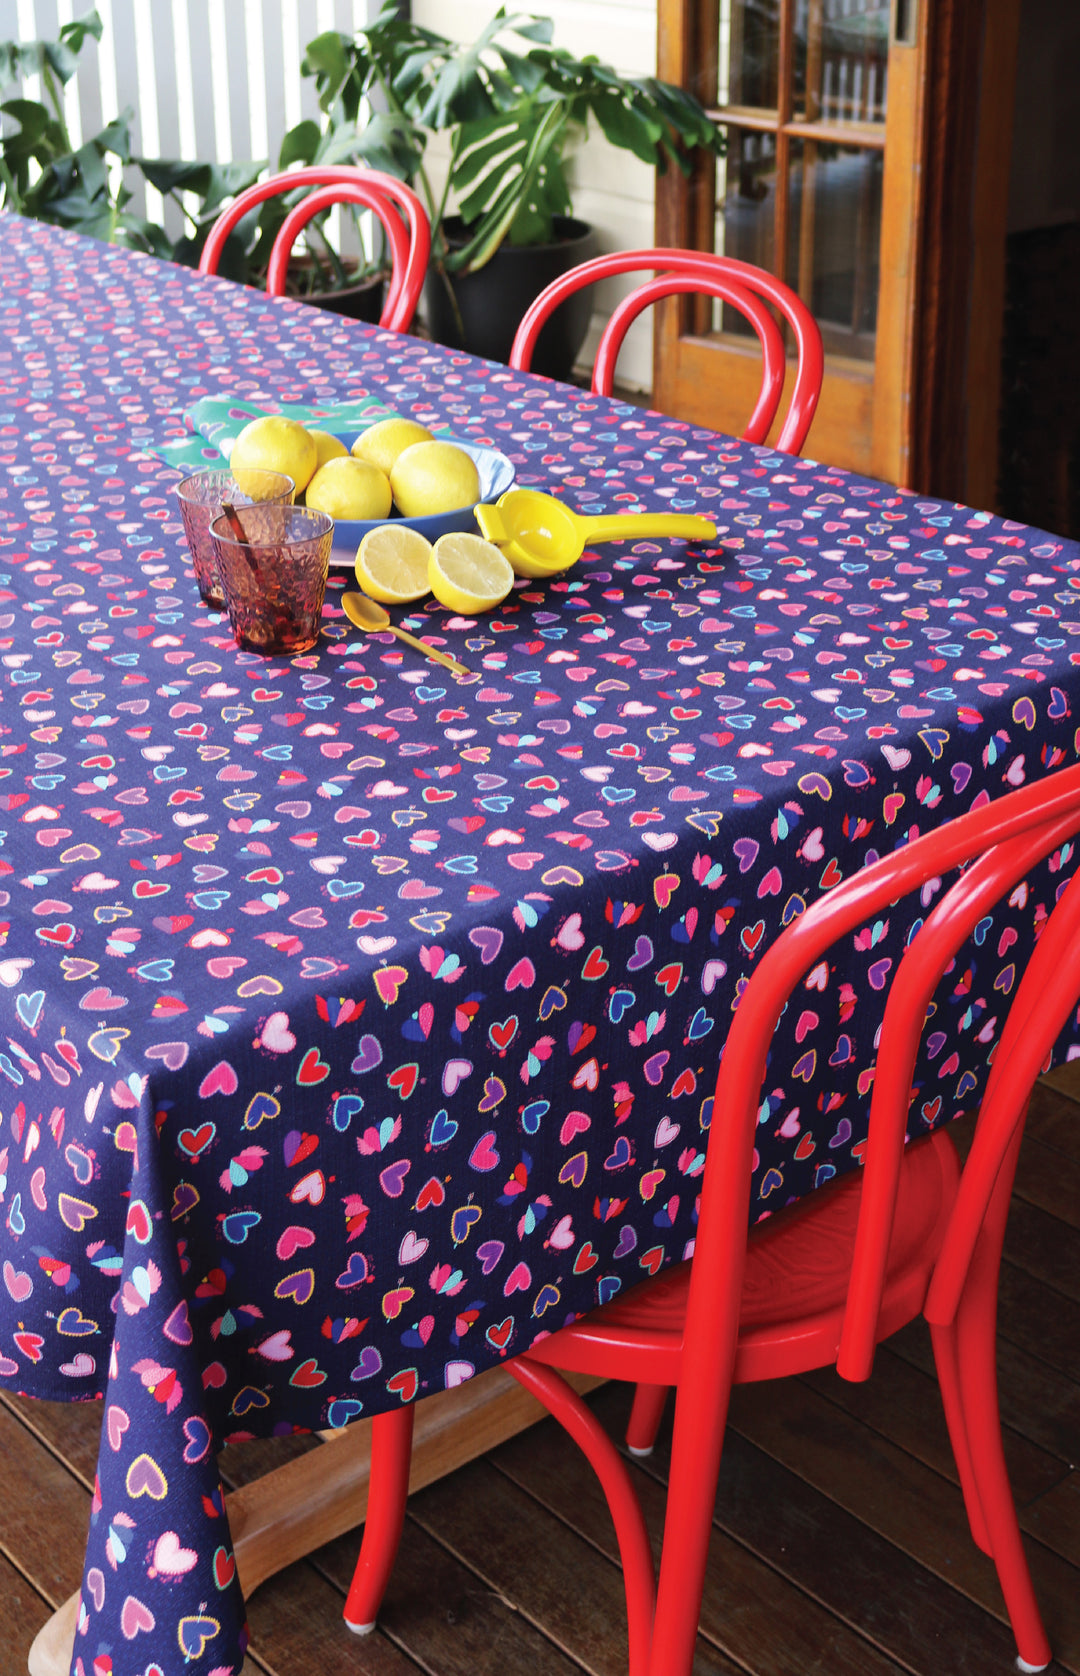 Tablecloth Large in queen of hearts navy